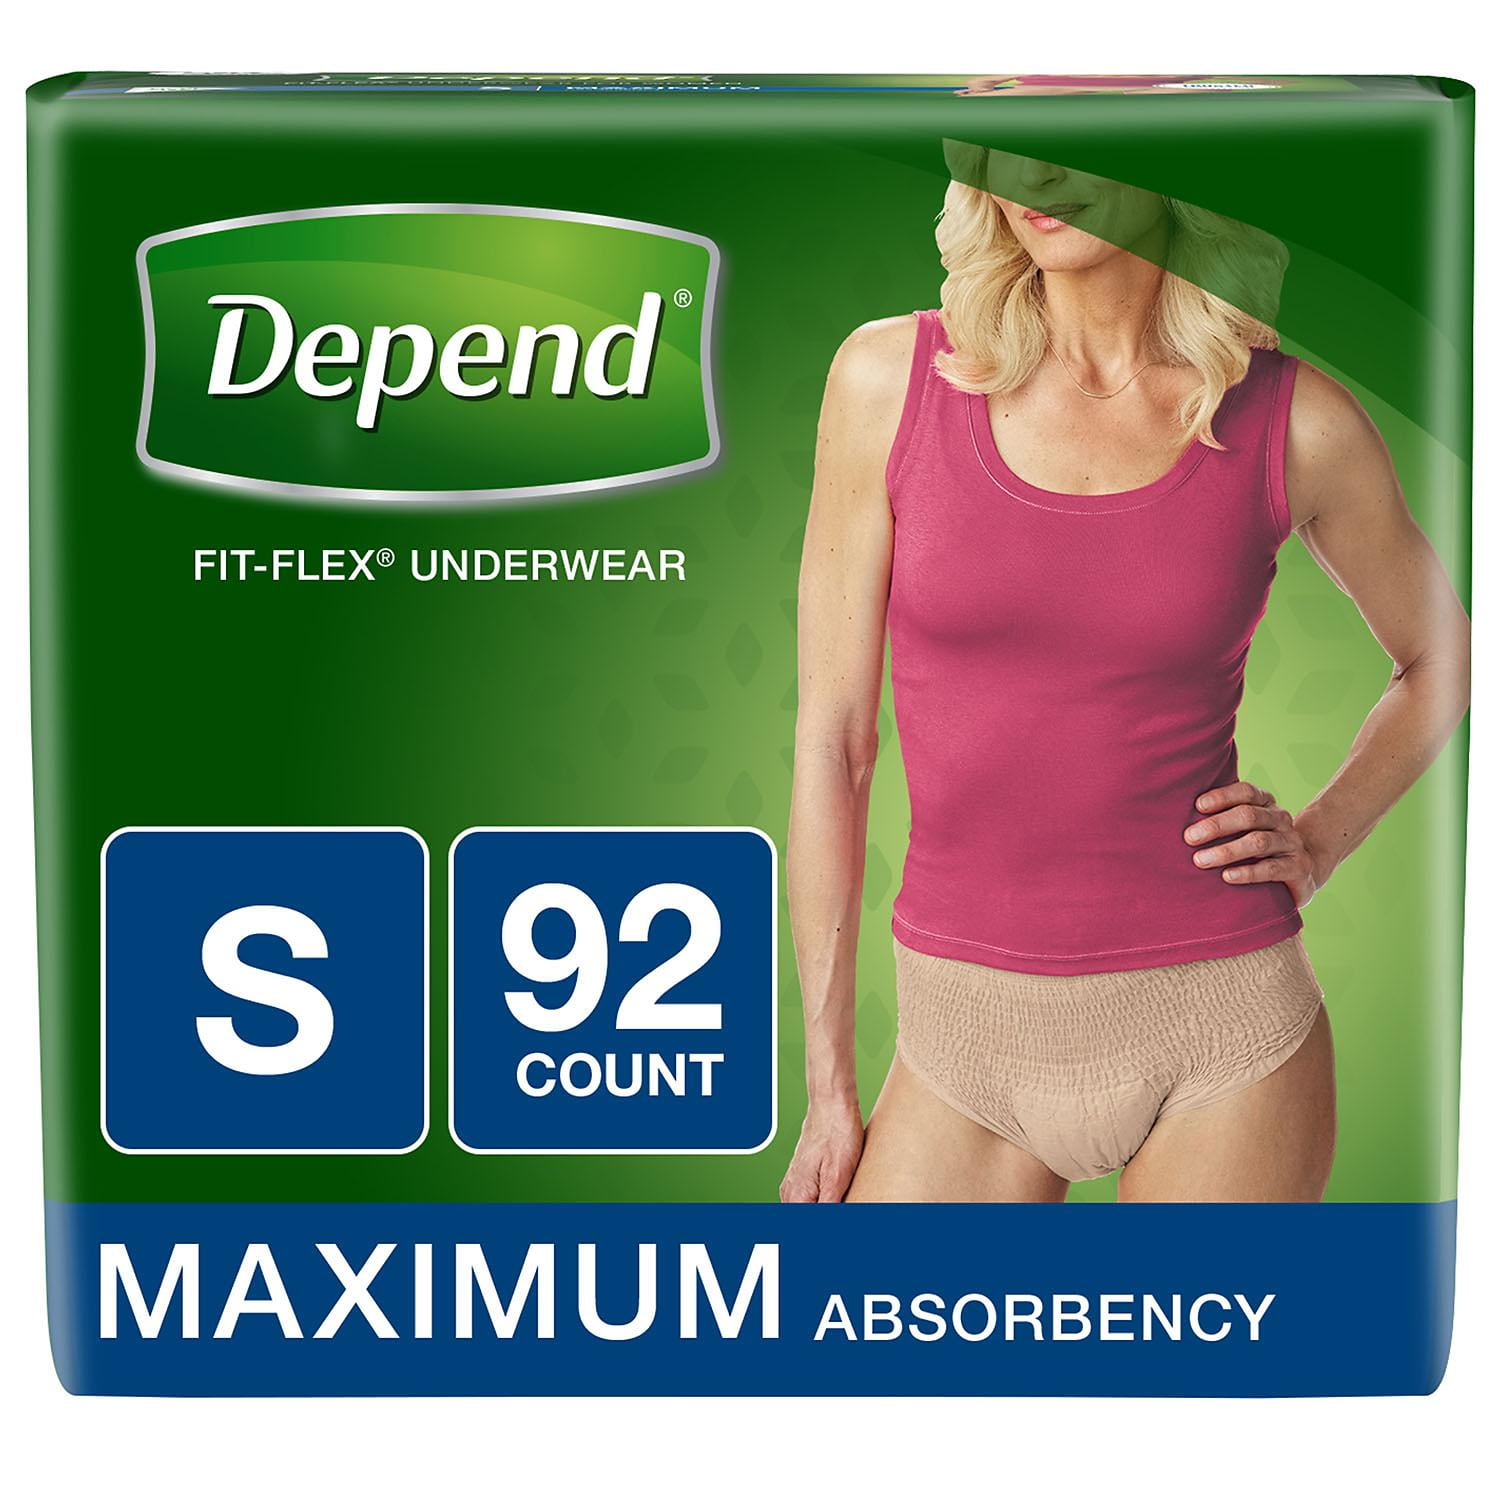 Depend Fit-Flex Underwear for Women, Small (92 Count)